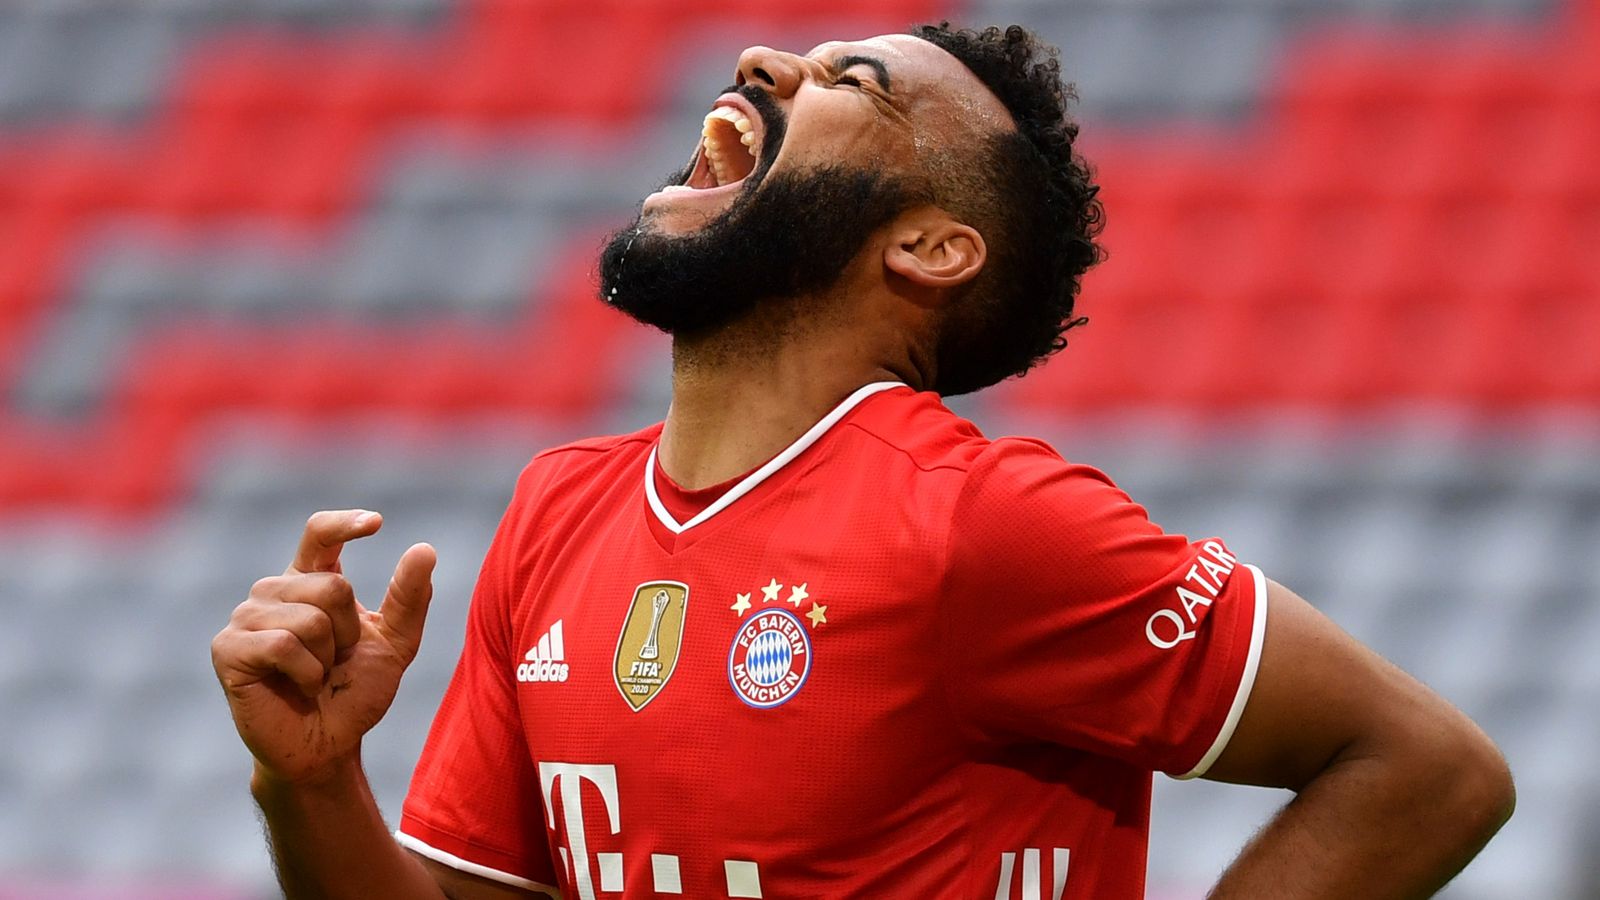 Eric Maxim Choupo-Moting Biography: Height, Stats, Age, Net Worth, Pictures, Wikipedia, Instagram, Wife, Awards